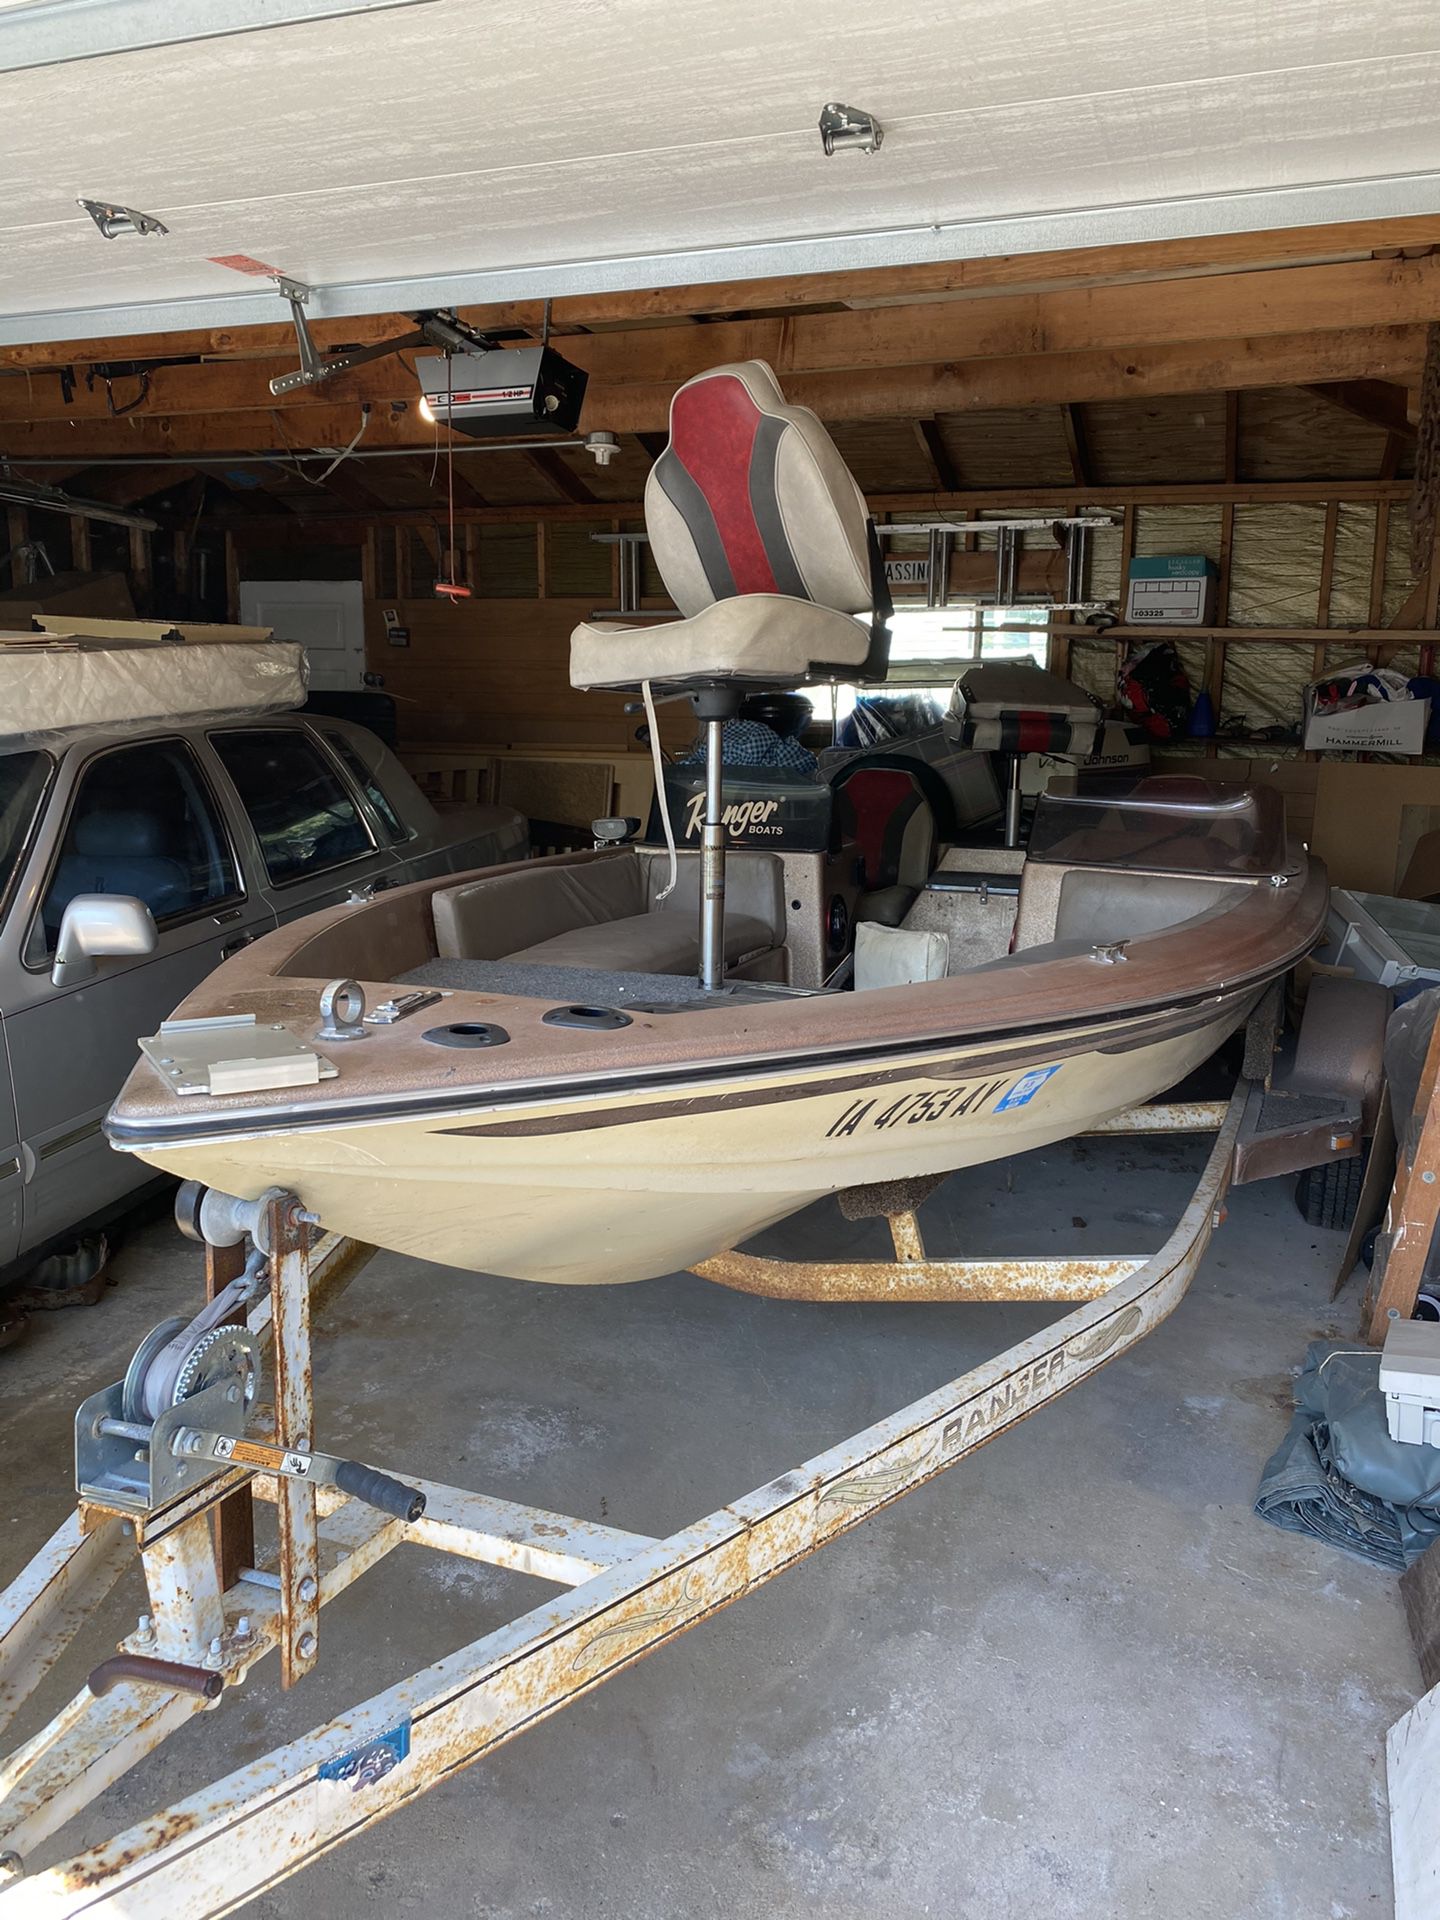 1989 18’ Ranger Bass Boat. Tan With Red Liking